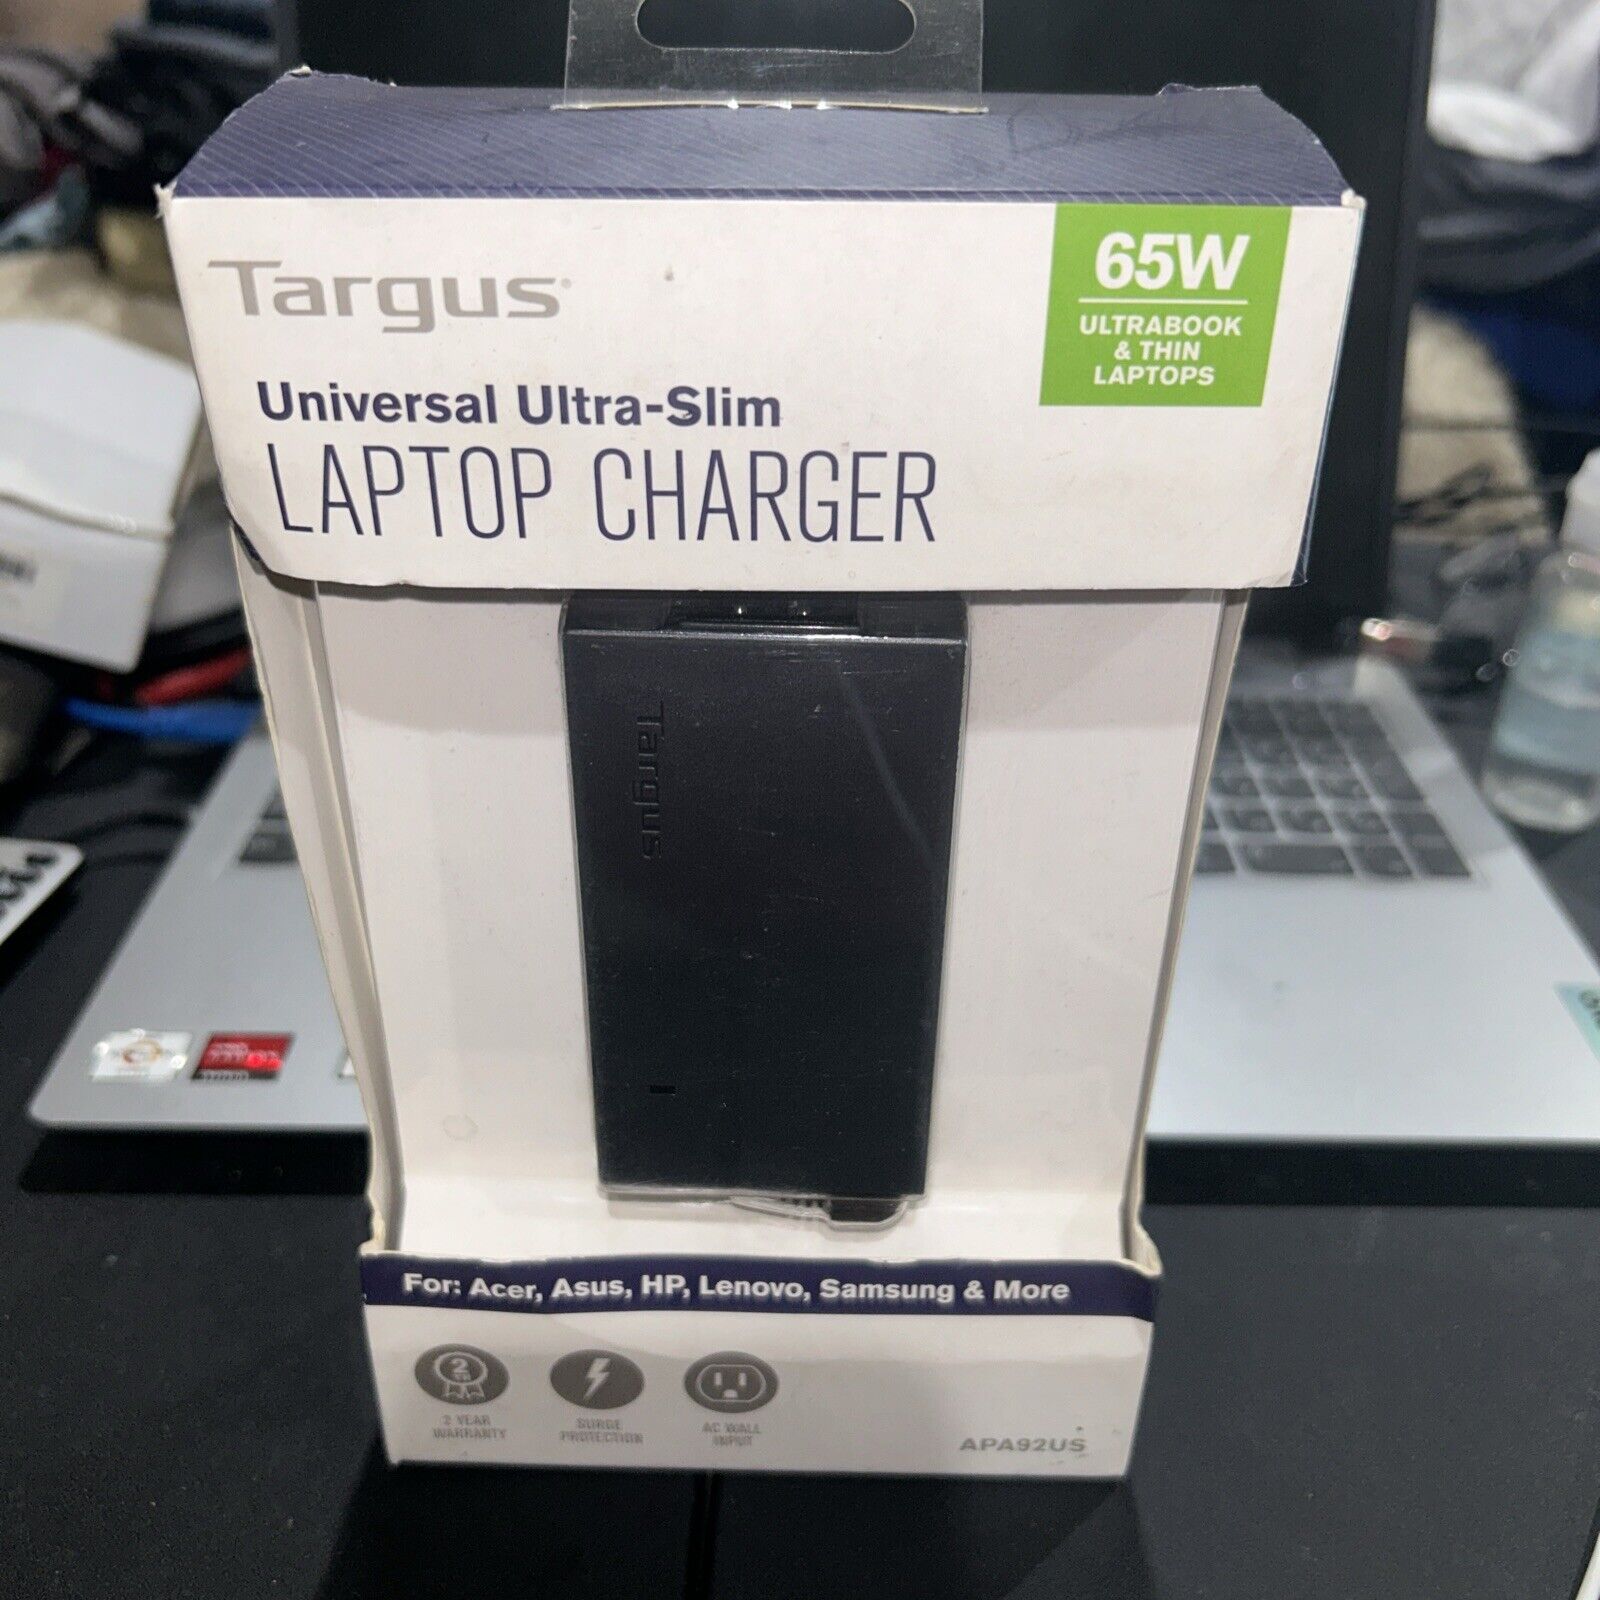 Targus APA92US 65W AC Ultra-Slim Universal Laptop Charger , only 3L tip included